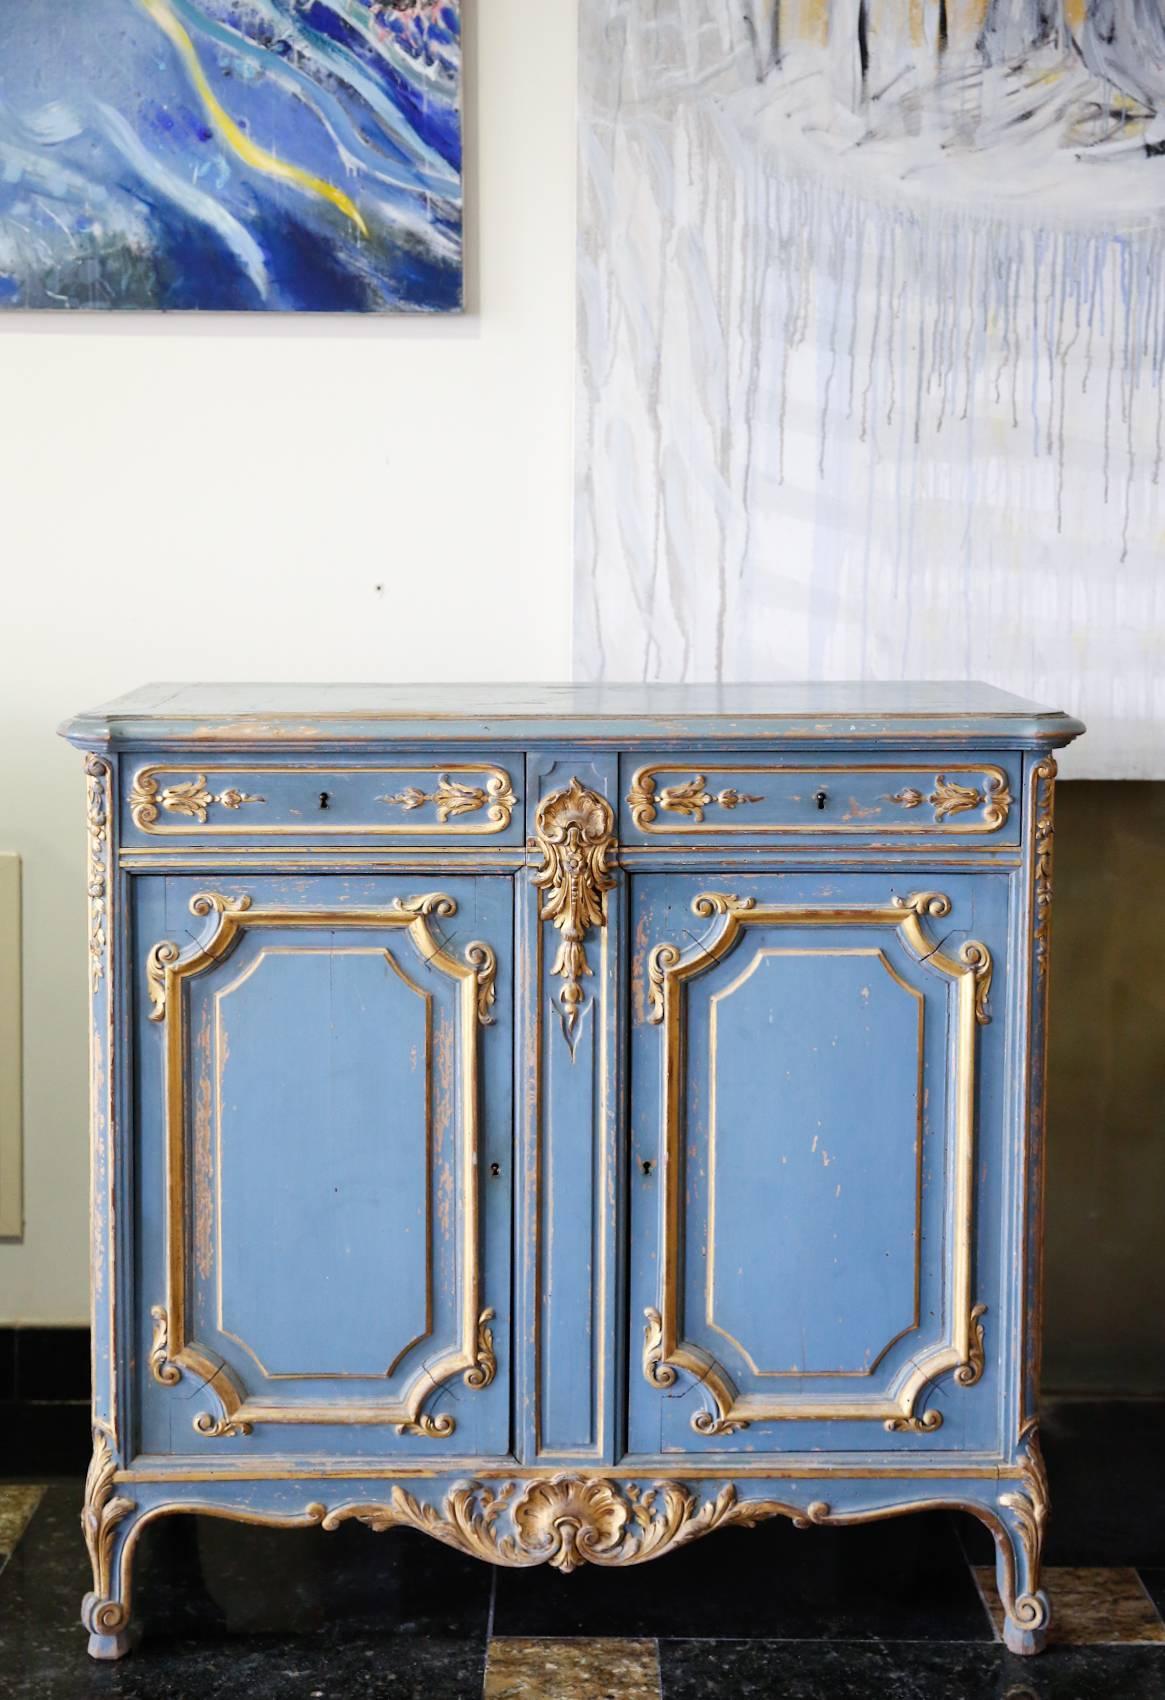 19th century beautiful Louis XV style hand-painted cabinet with two doors and two drawers and charming design. Made of solid wood and perfectly painted in a light blue with an antique gold accents. This gives the look of a beautiful aged finish.